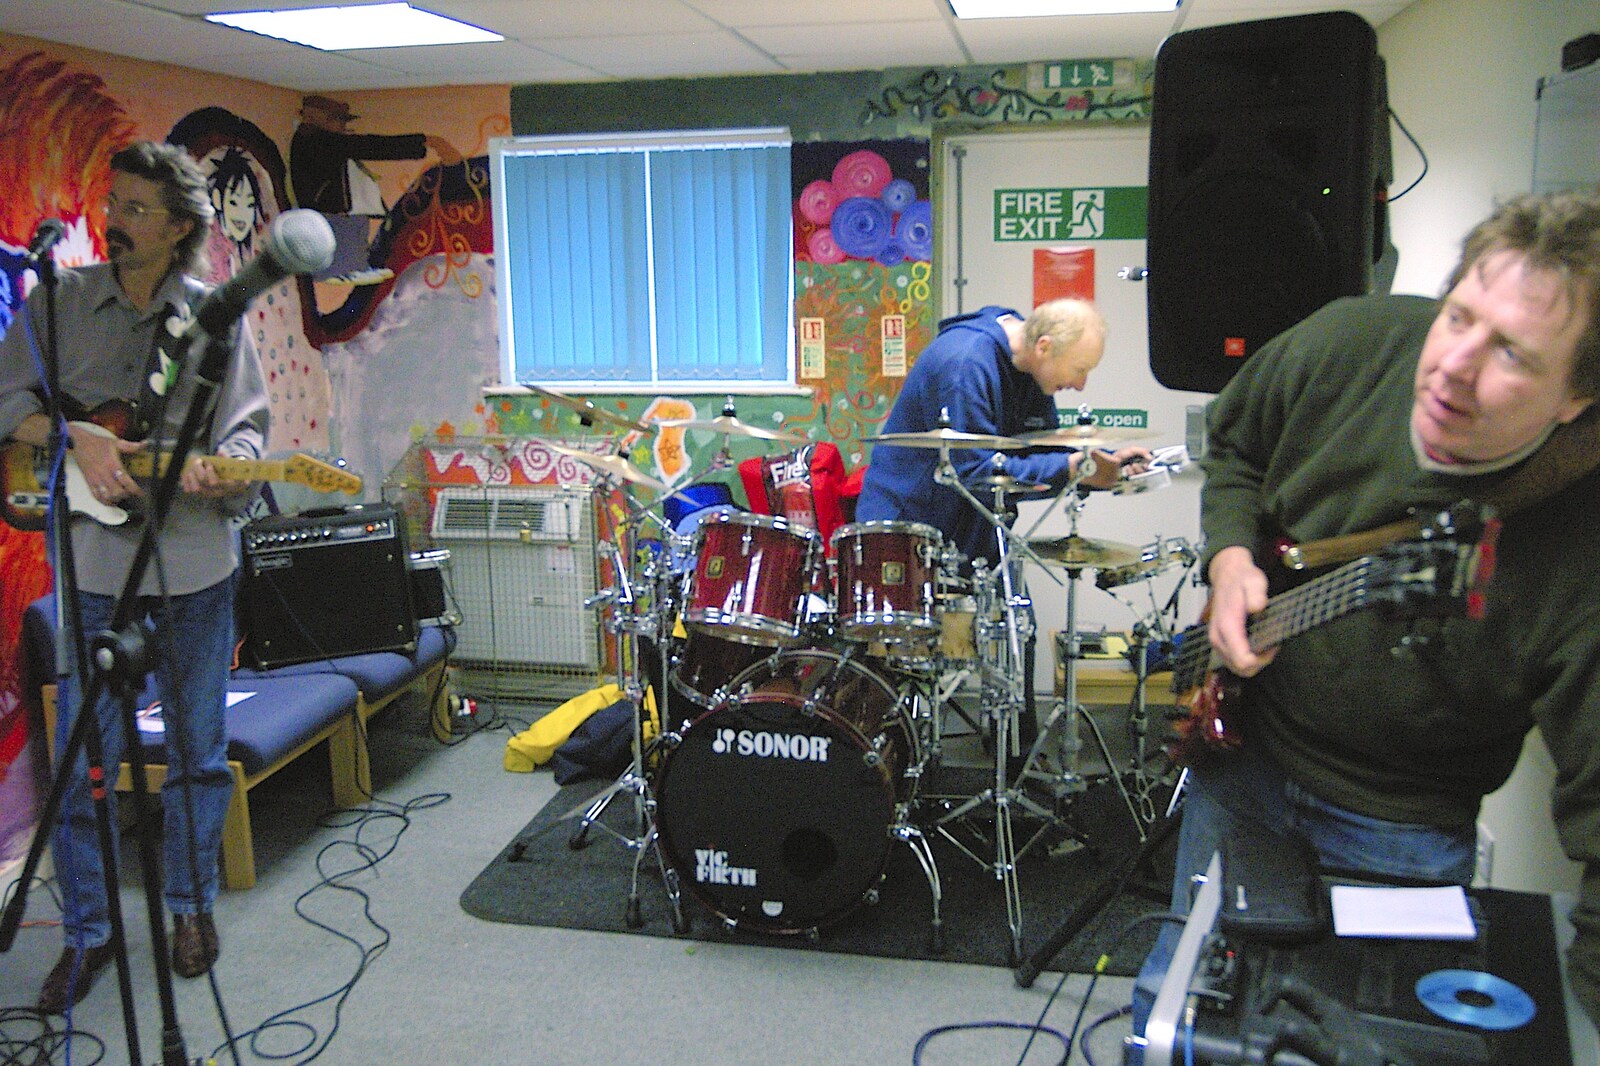 The BBs set up for rehearsal in the youth club from Hard-Fi at Brixton Academy, The BBs, and Ping Pong at The Swan Inn - 15th May 2006